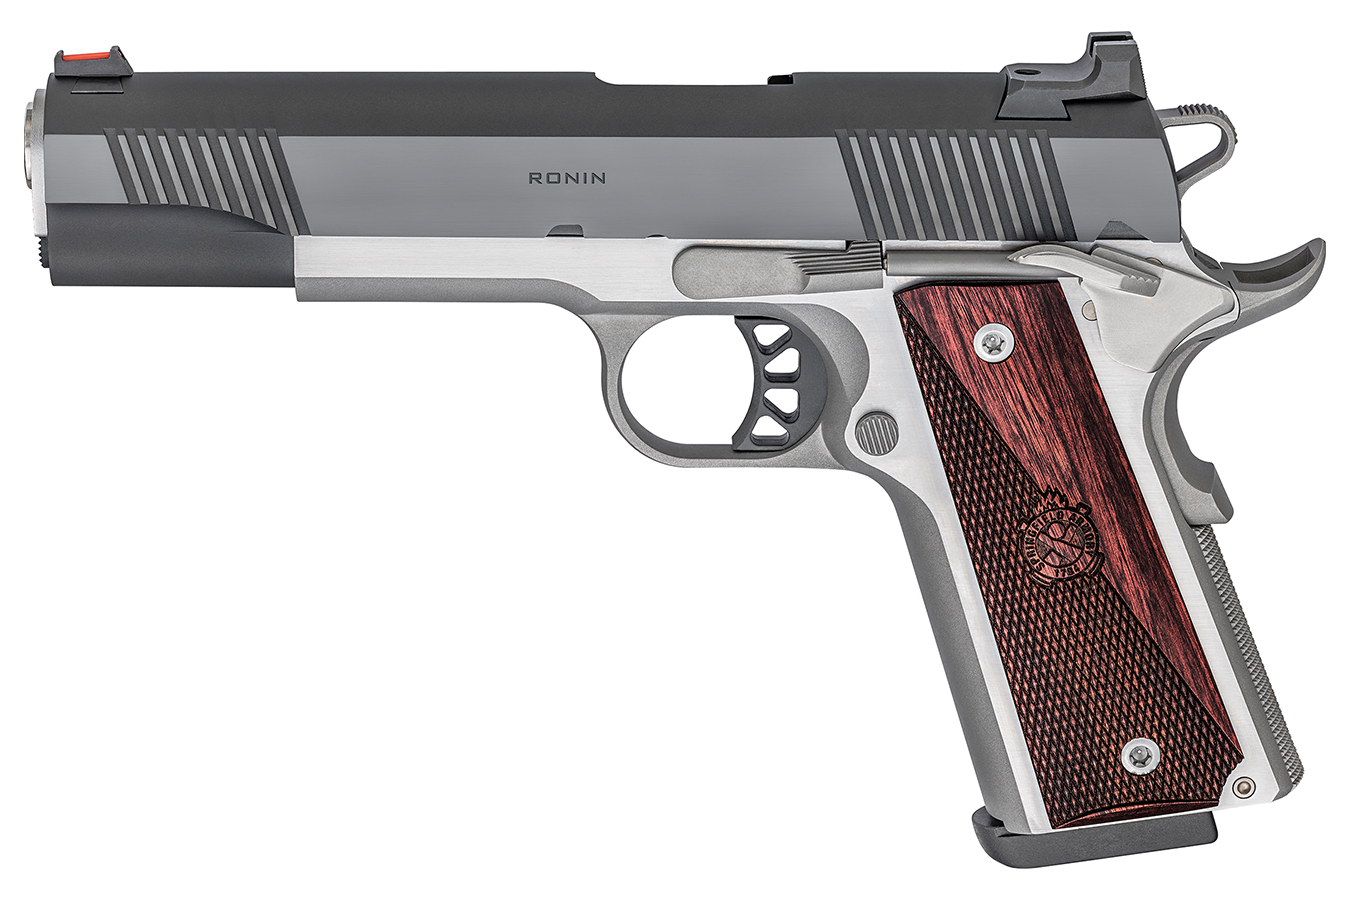 No. 19 Best Selling: SPRINGFIELD RONIN 10MM 1911 SEMI-AUTO PISTOL WITH WOOD GRIPS